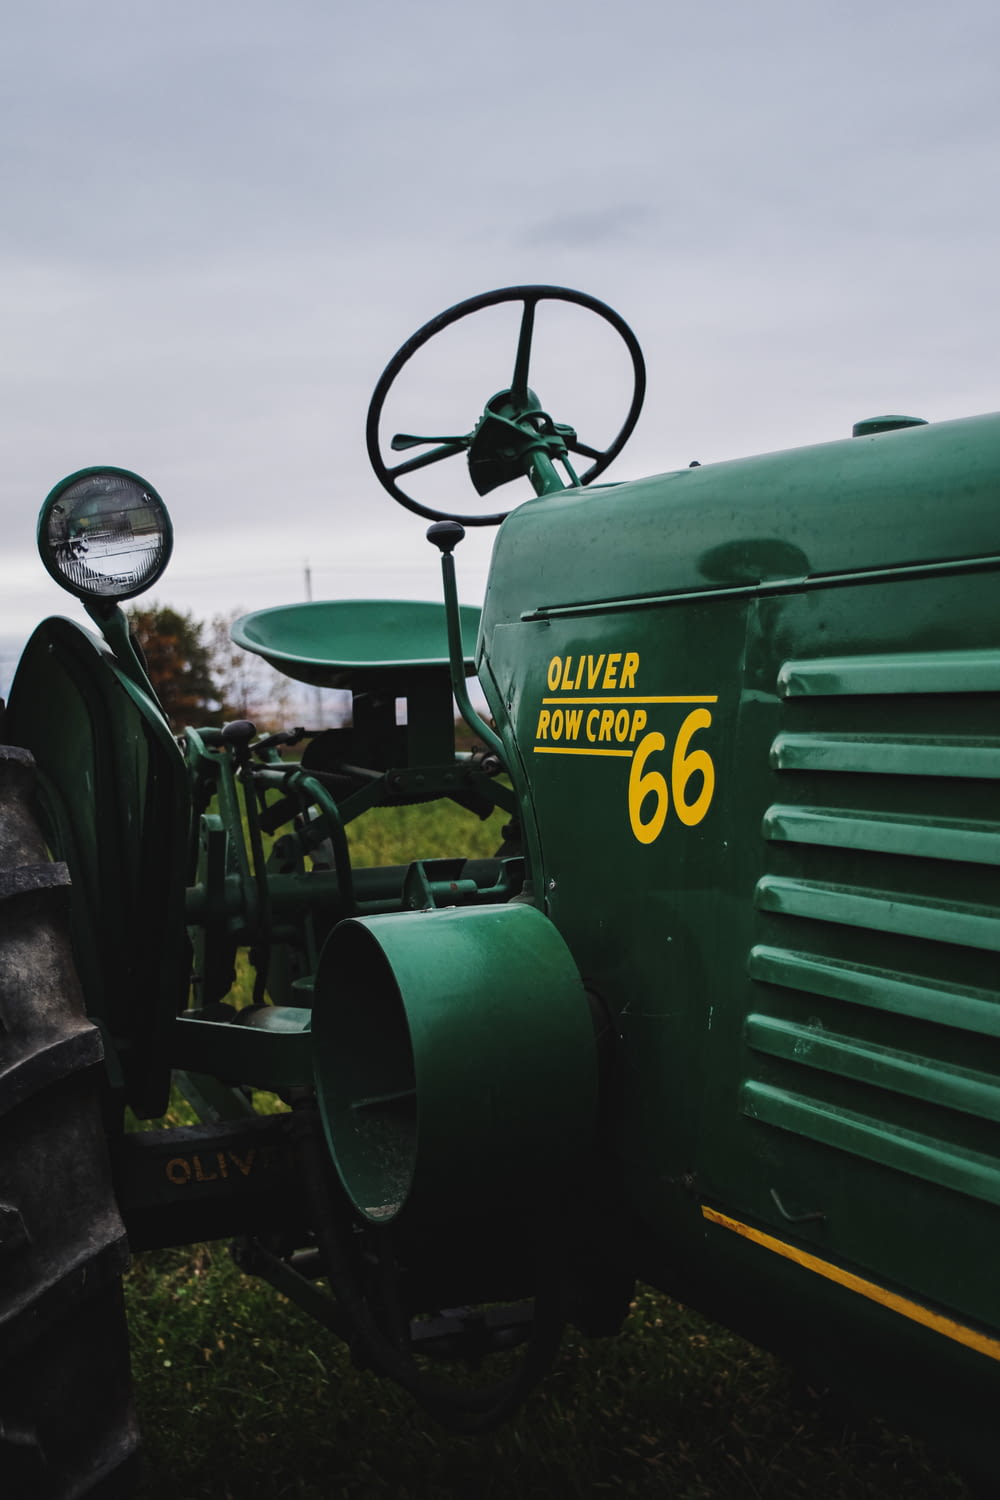 a close up of the front of a green tractor